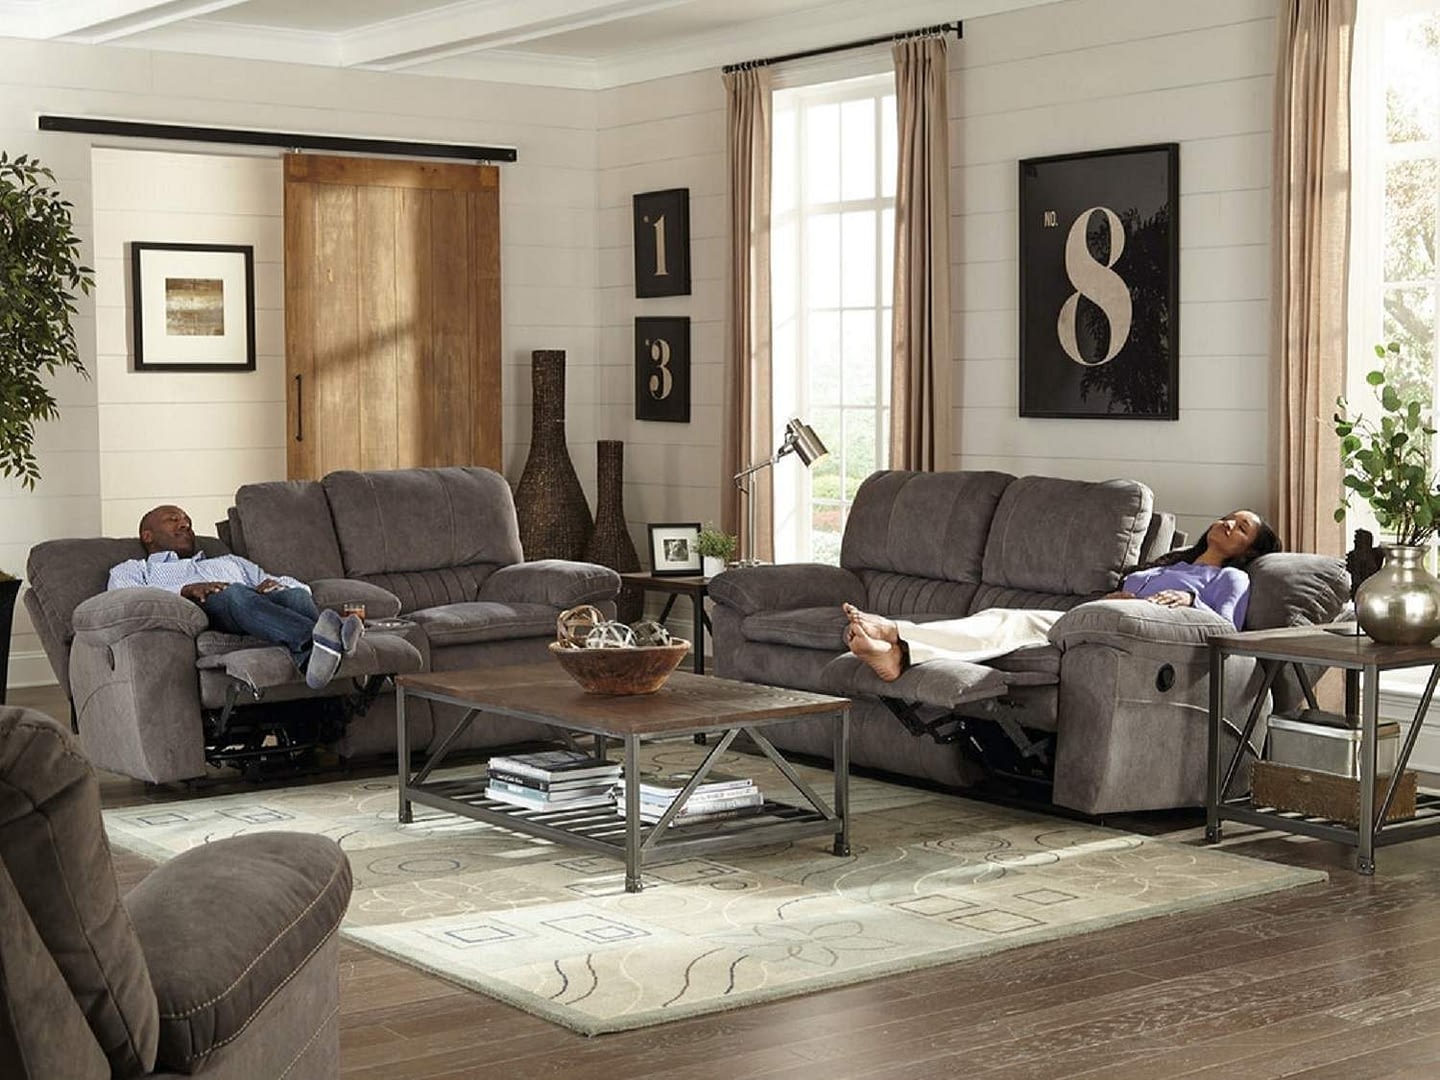 ZOLA Reclining Sofa & Love-seat with Console - Reclined